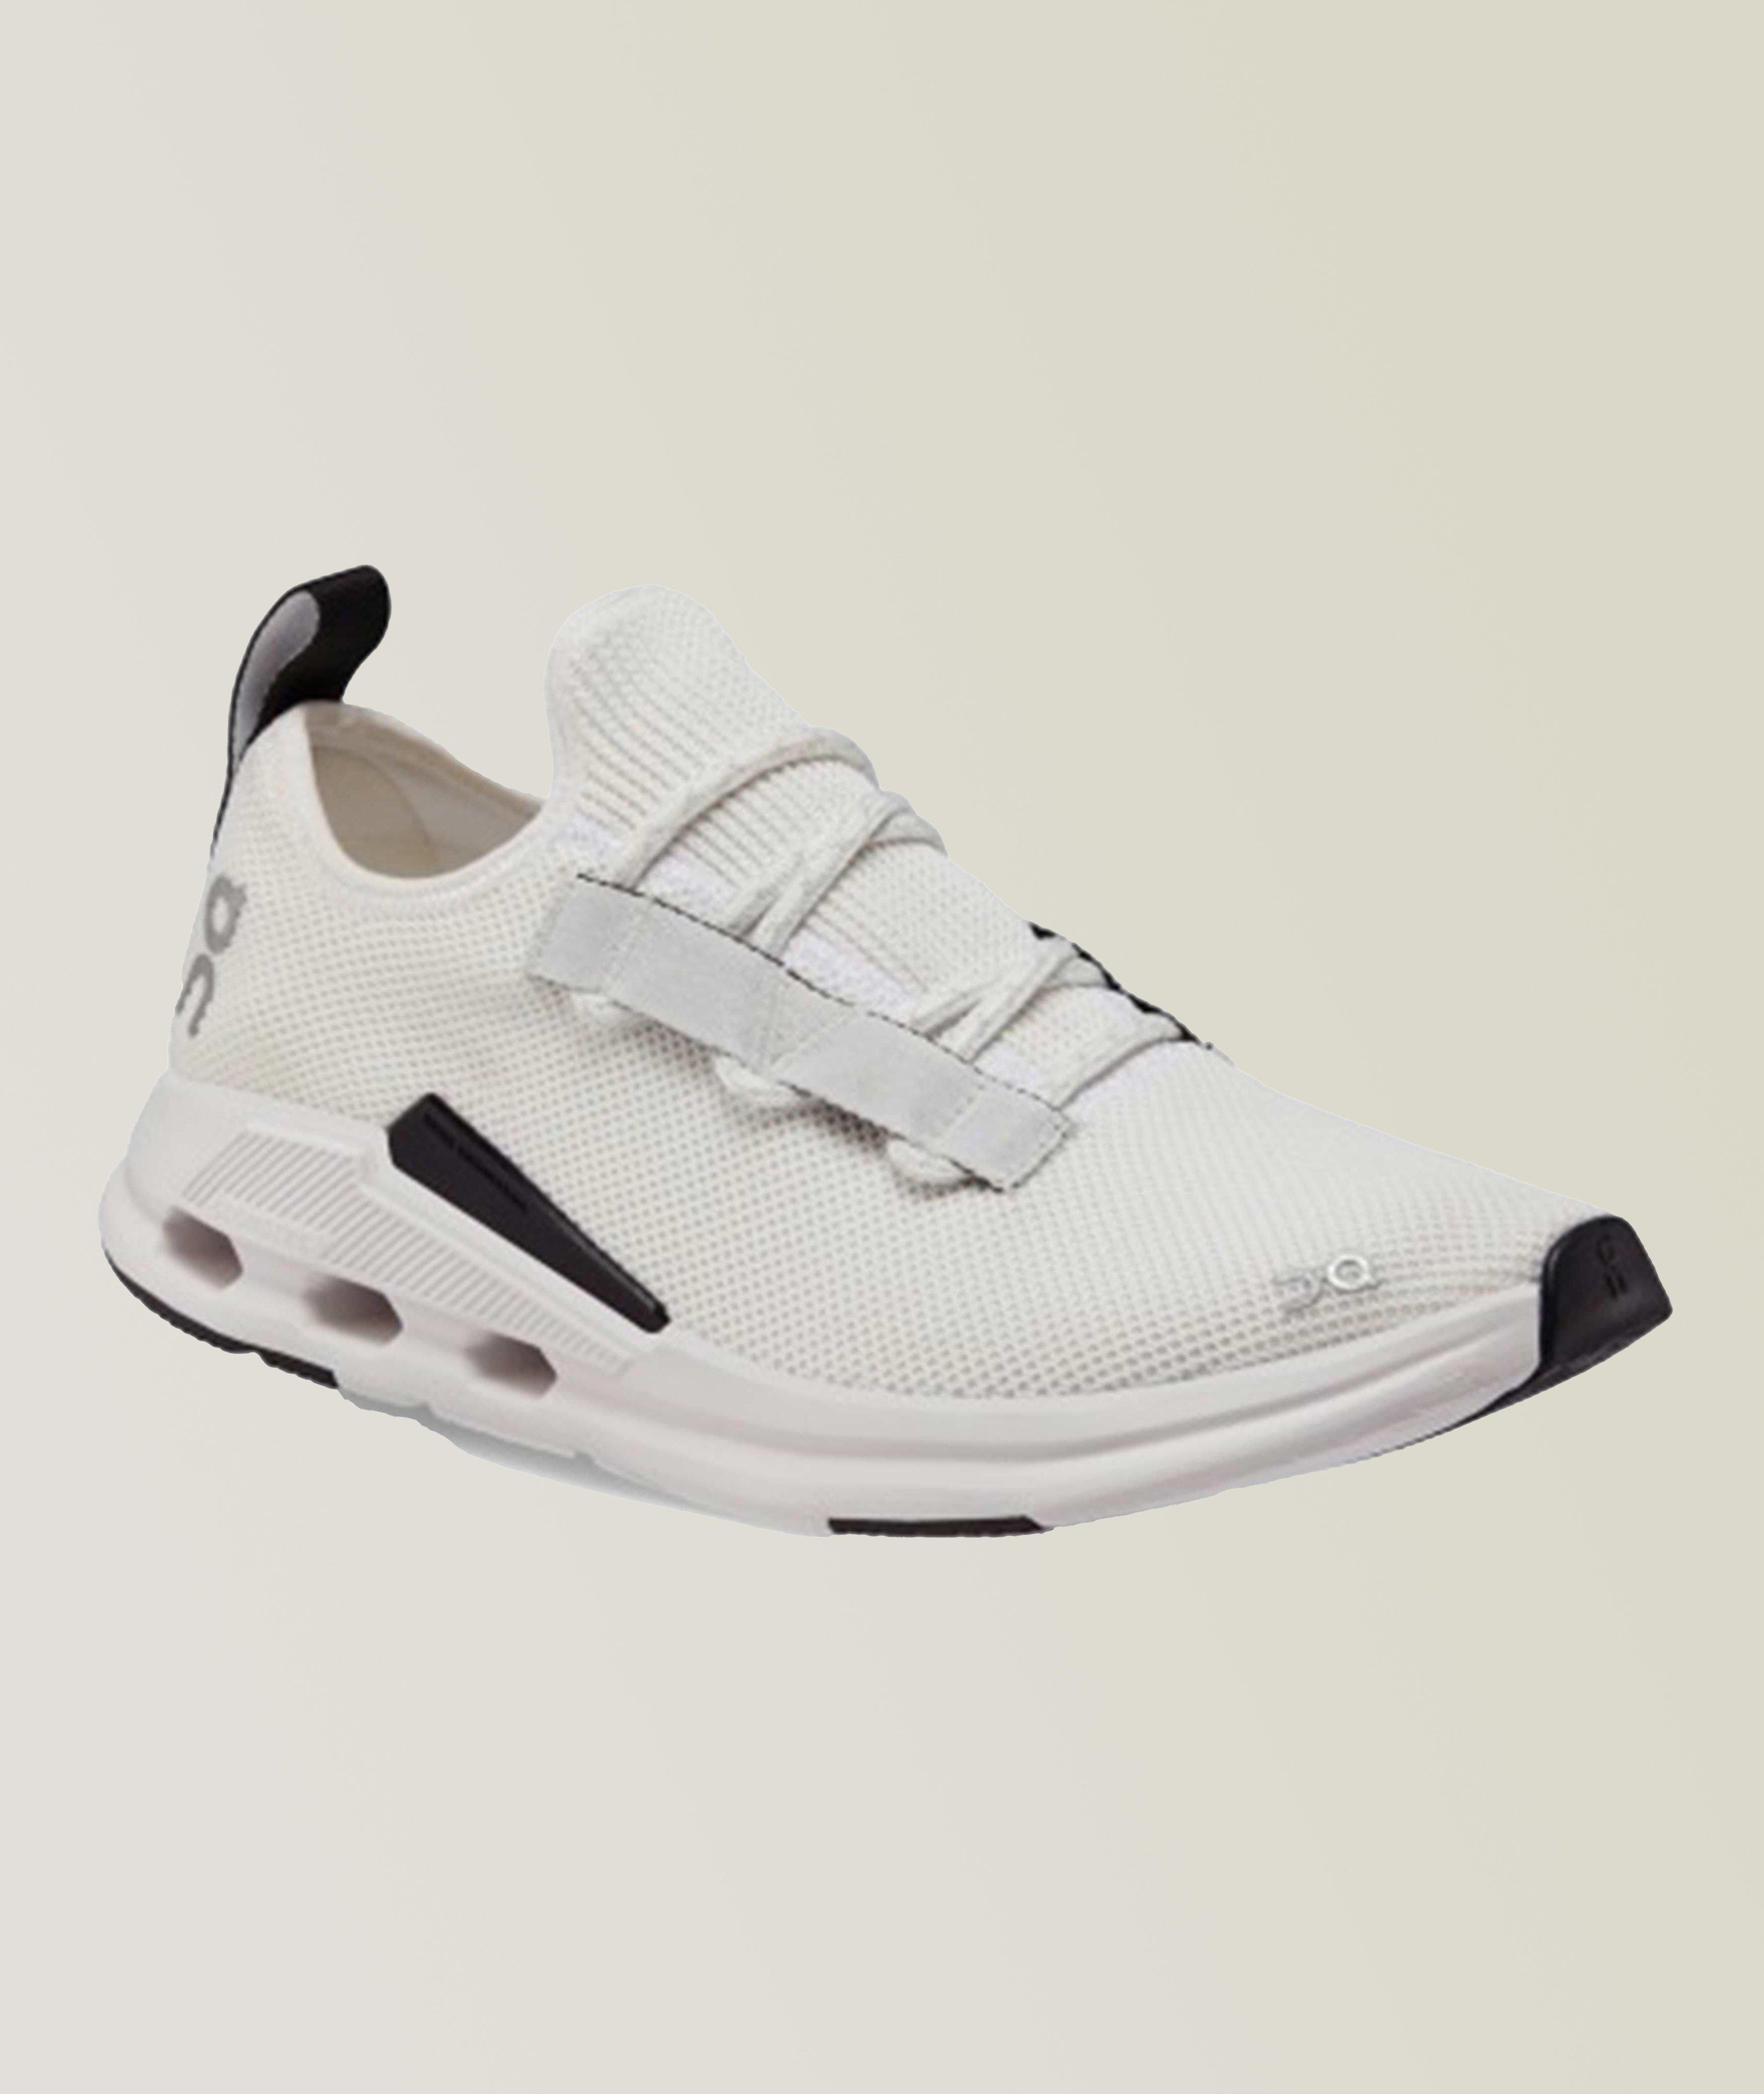 Chaussure sport Cloudeasy image 0